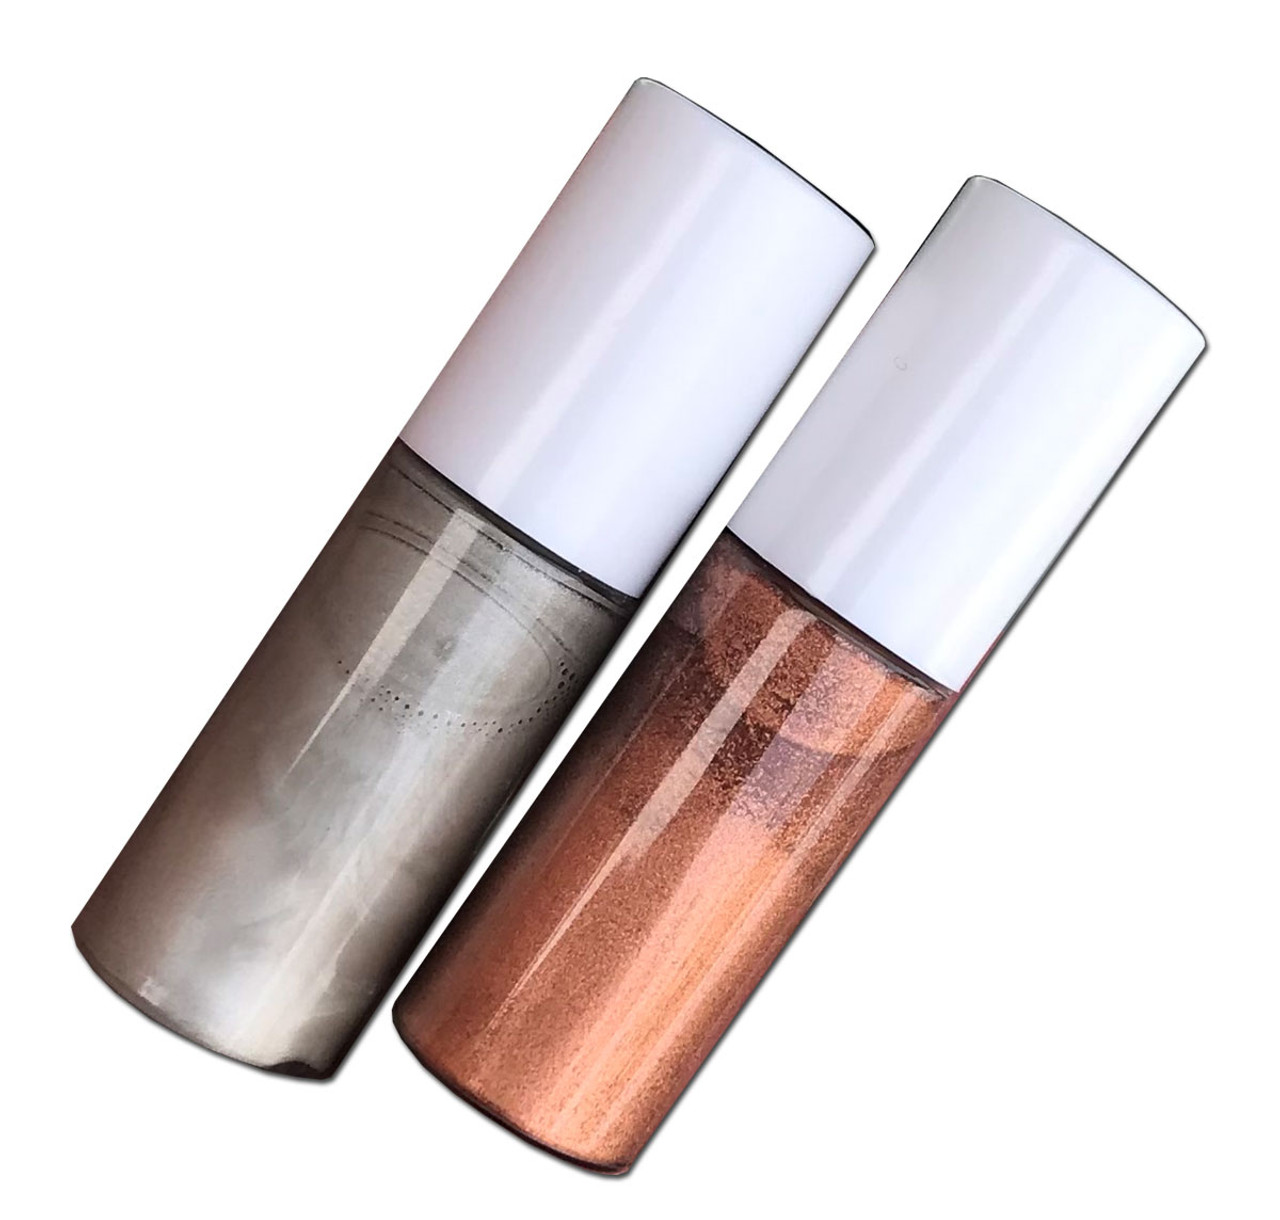 Discover our Copper and Silver Conductive Paints, perfect for bio electrode therapy. Enhance your therapeutic practices with our high-quality conductive inks.